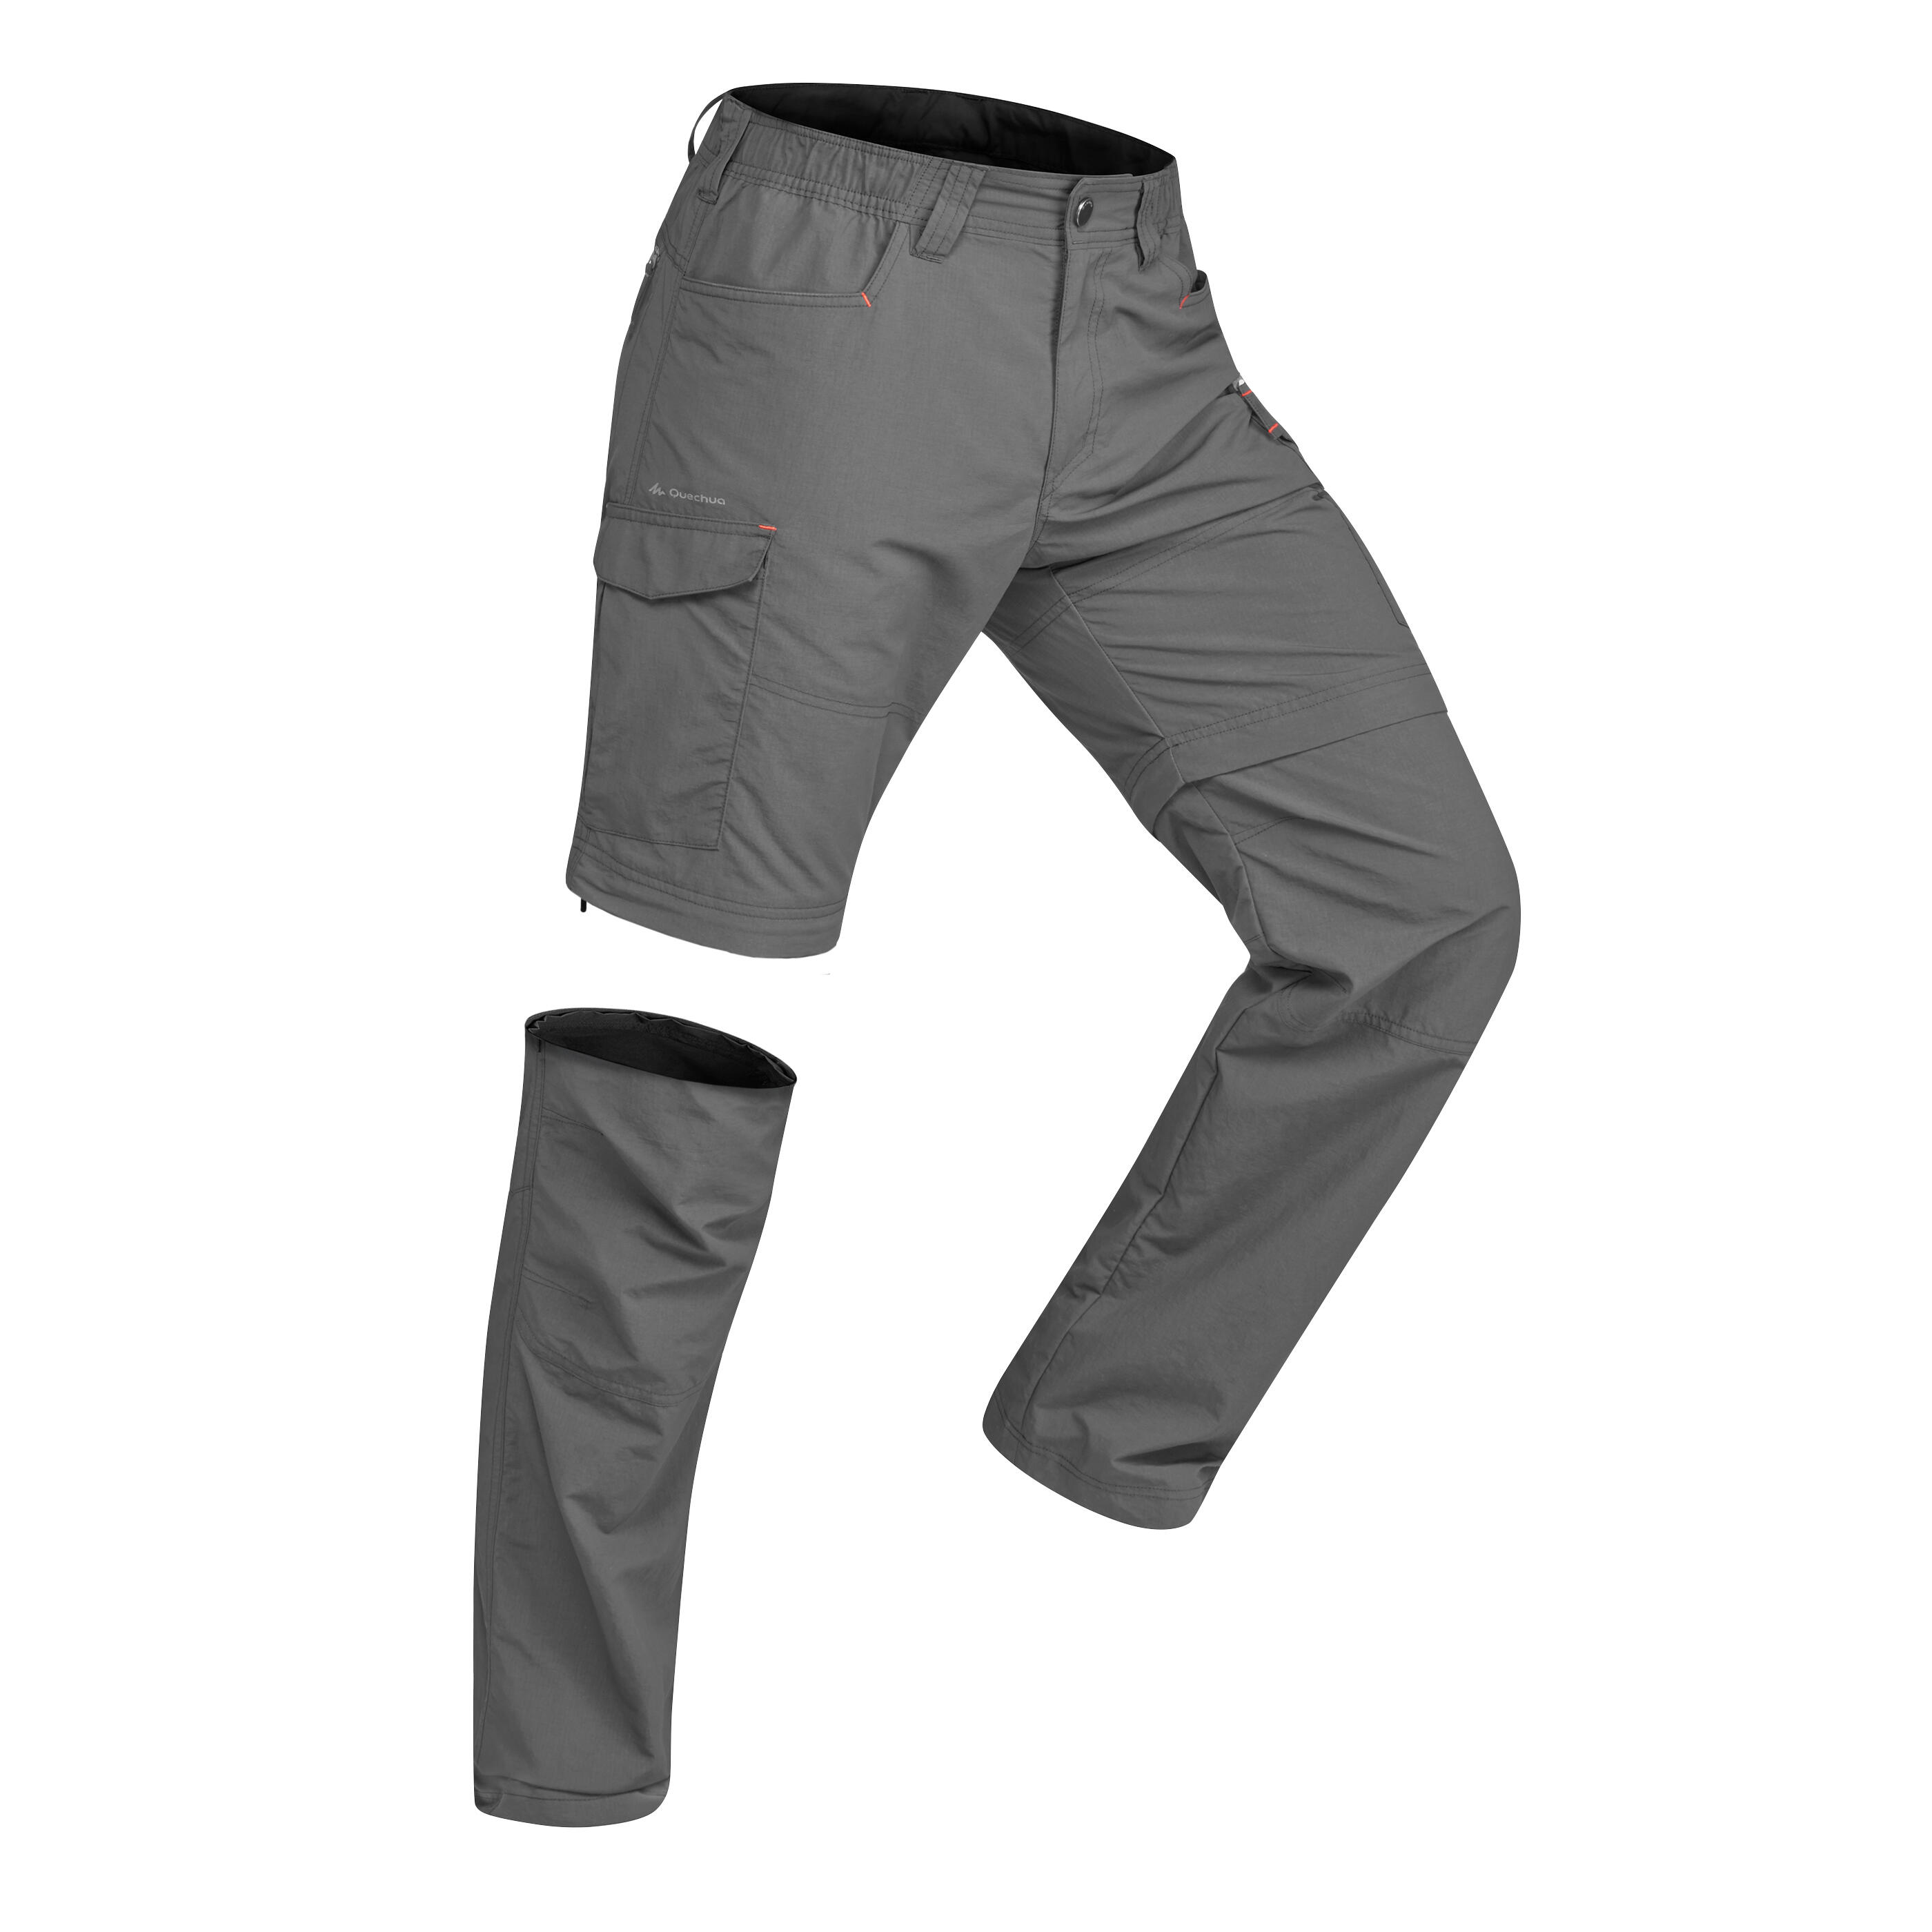 Track Pants, Straight fit, TSR... - Decathlon Sports India | Facebook